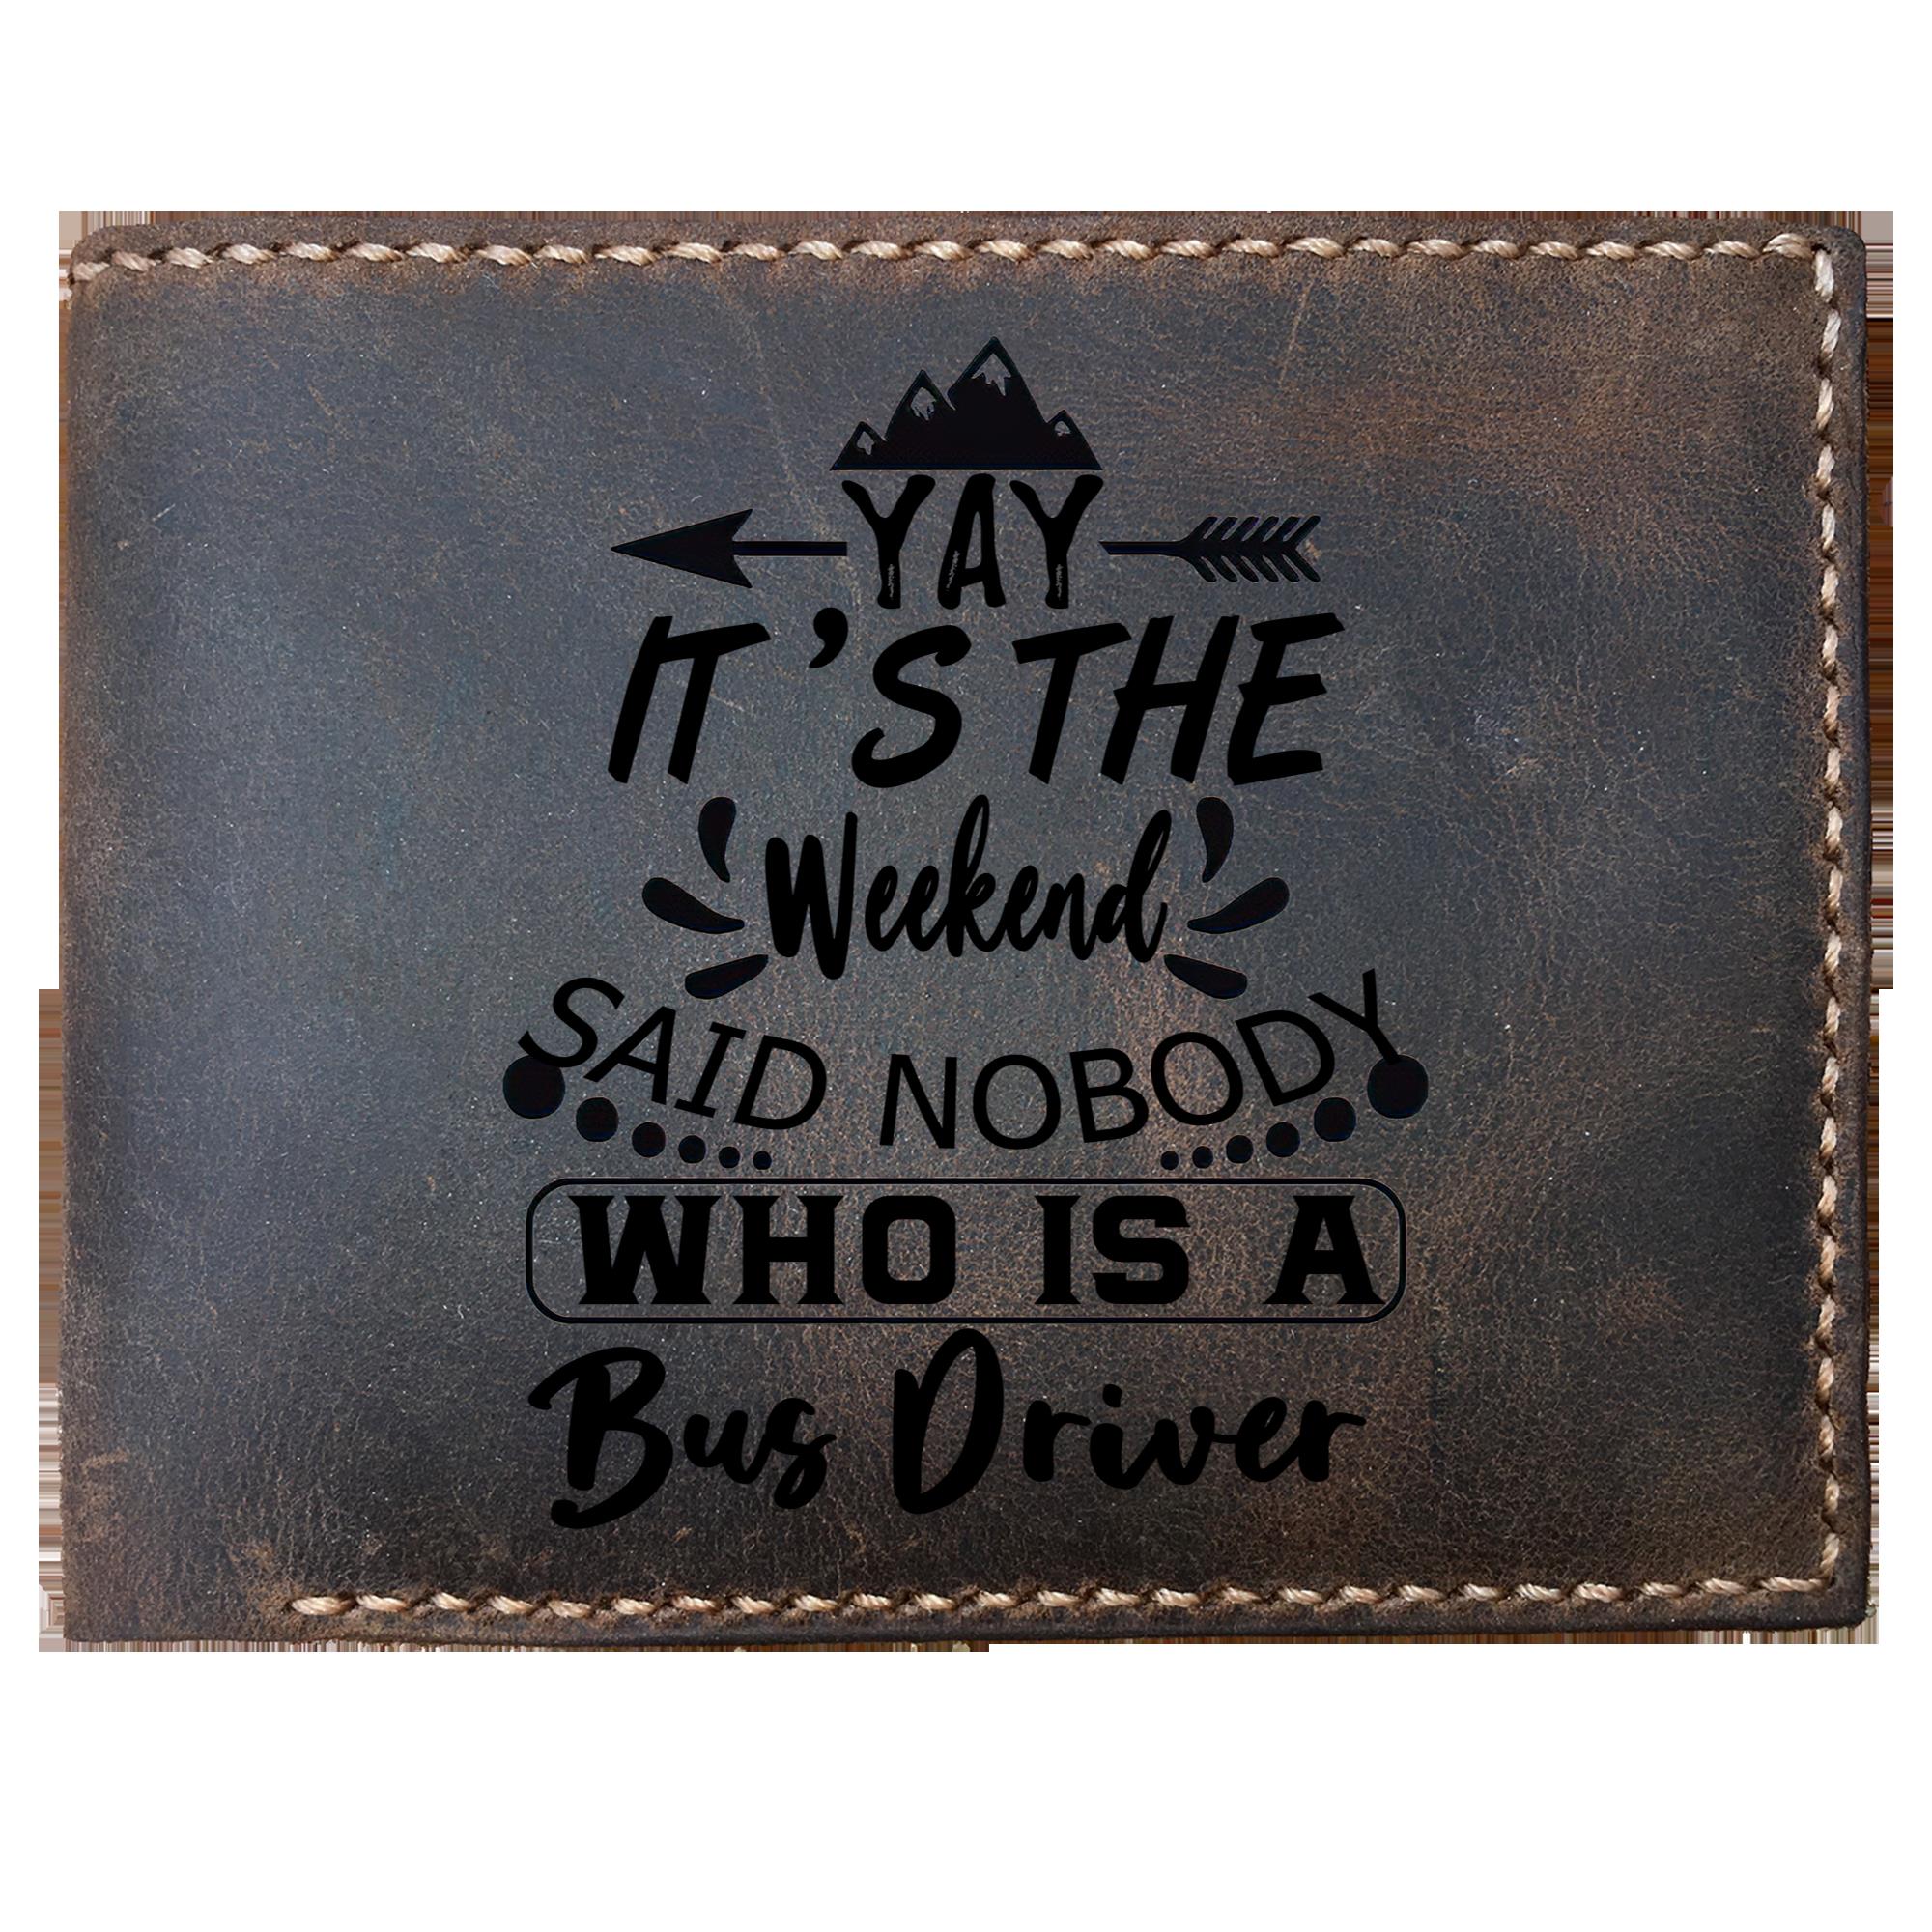 Skitongifts Funny Custom Laser Engraved Bifold Leather Wallet For Men, It's The Weekend Said Nobody Who Is A Bus Driver, Father's Day Gifts